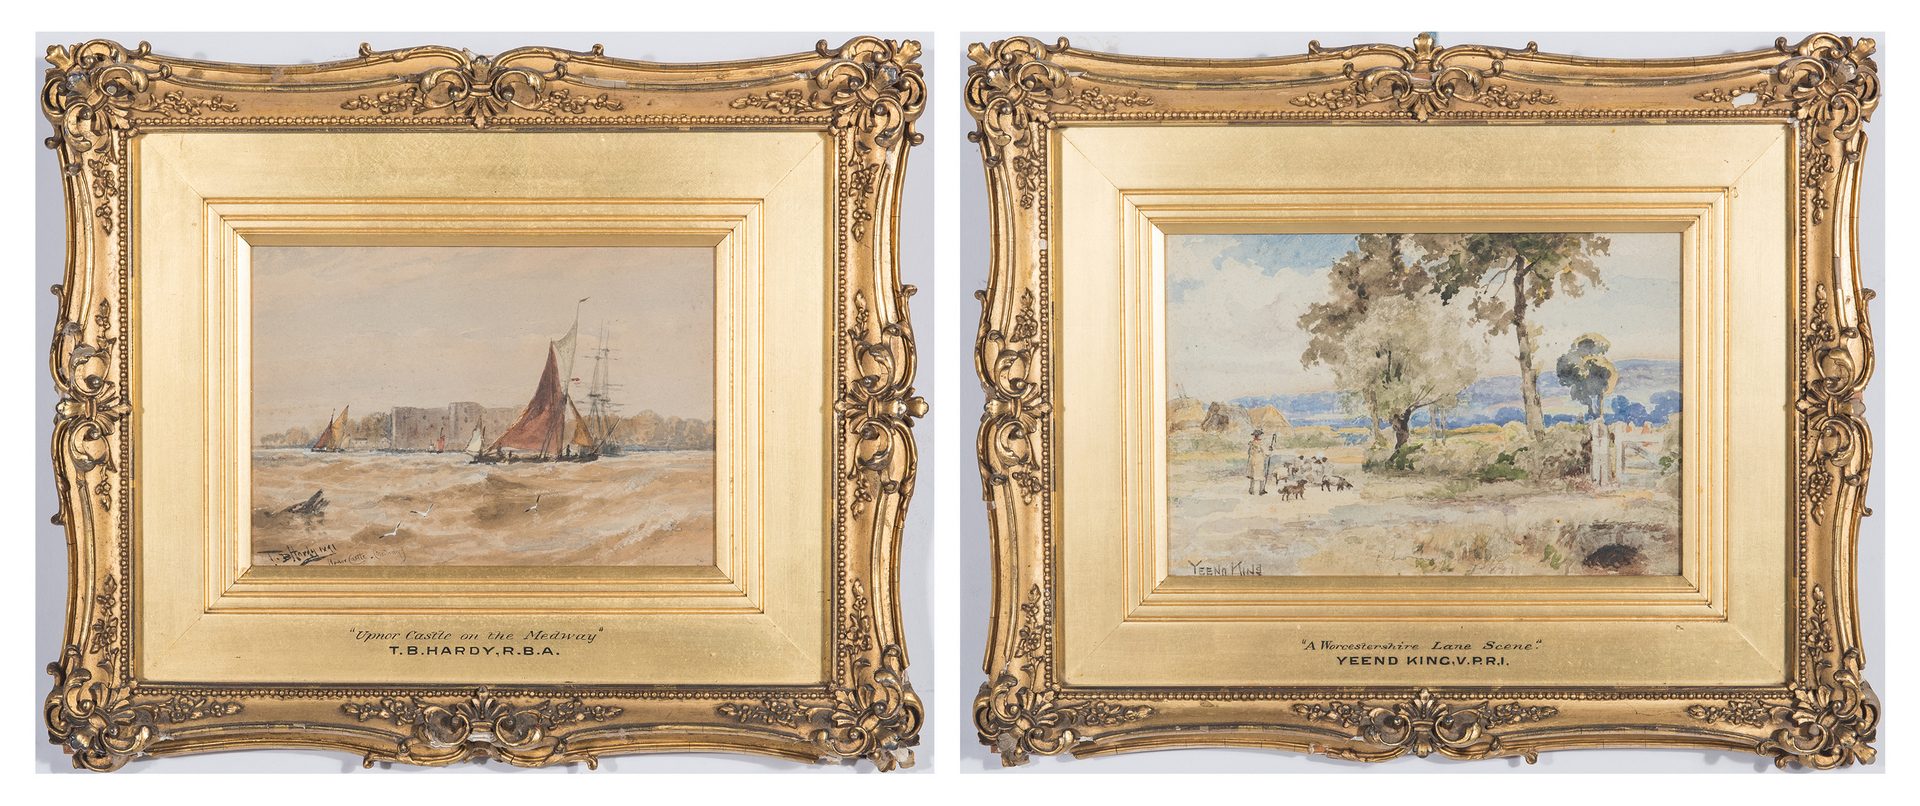 Lot 85: 19th C. Watercolor Landscape and Seascape by T. Hardy, Yeend-King